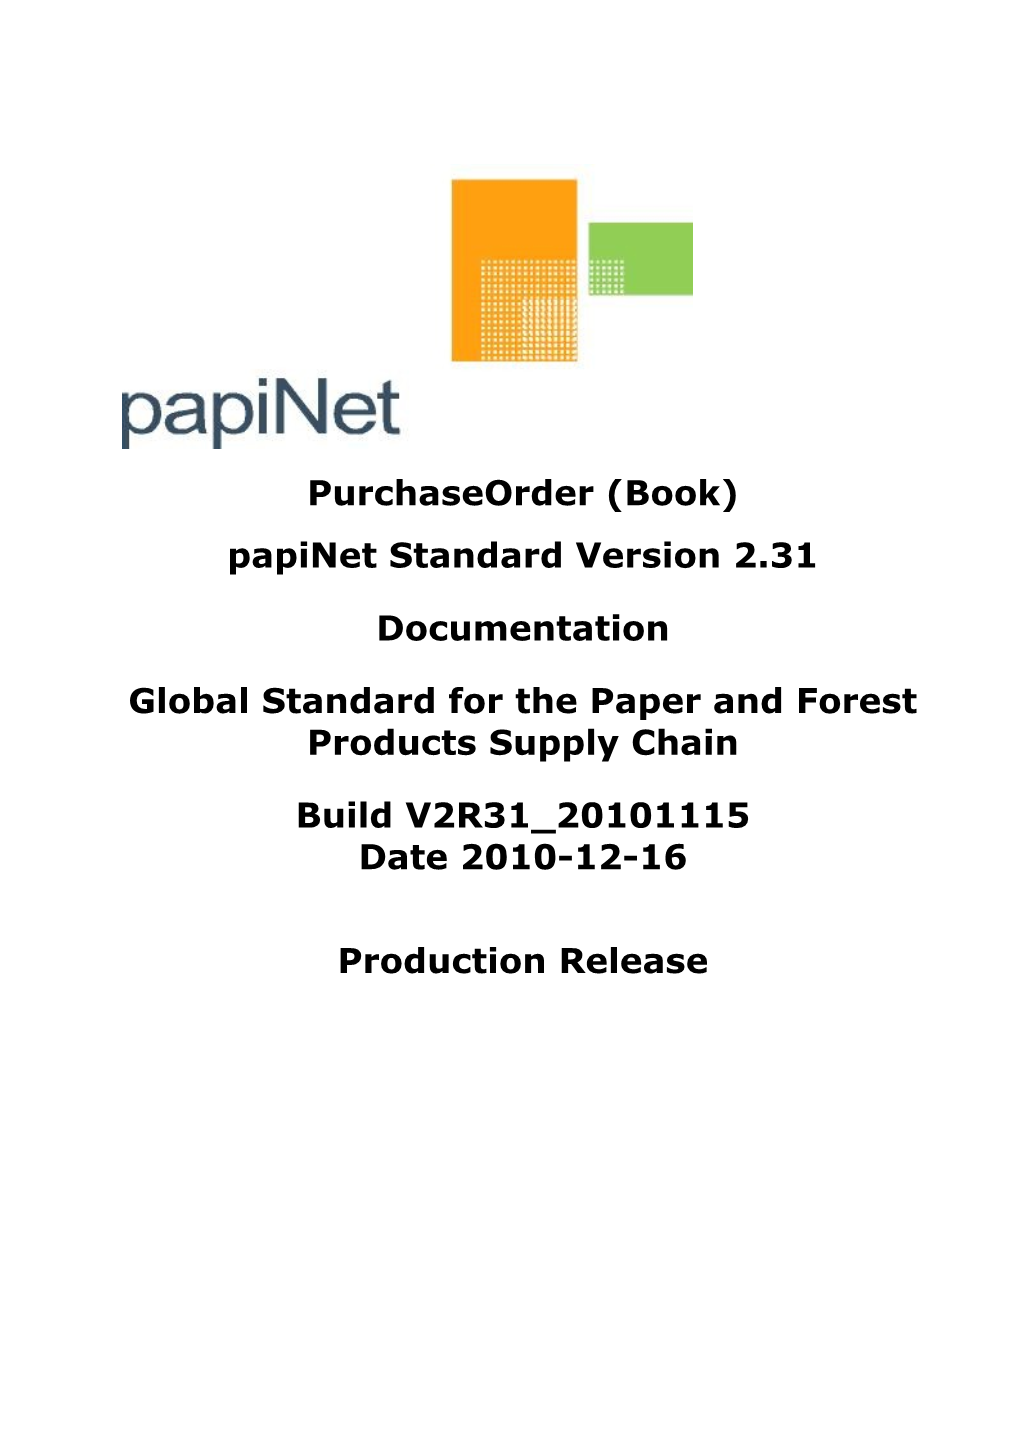 The Papinet Standard